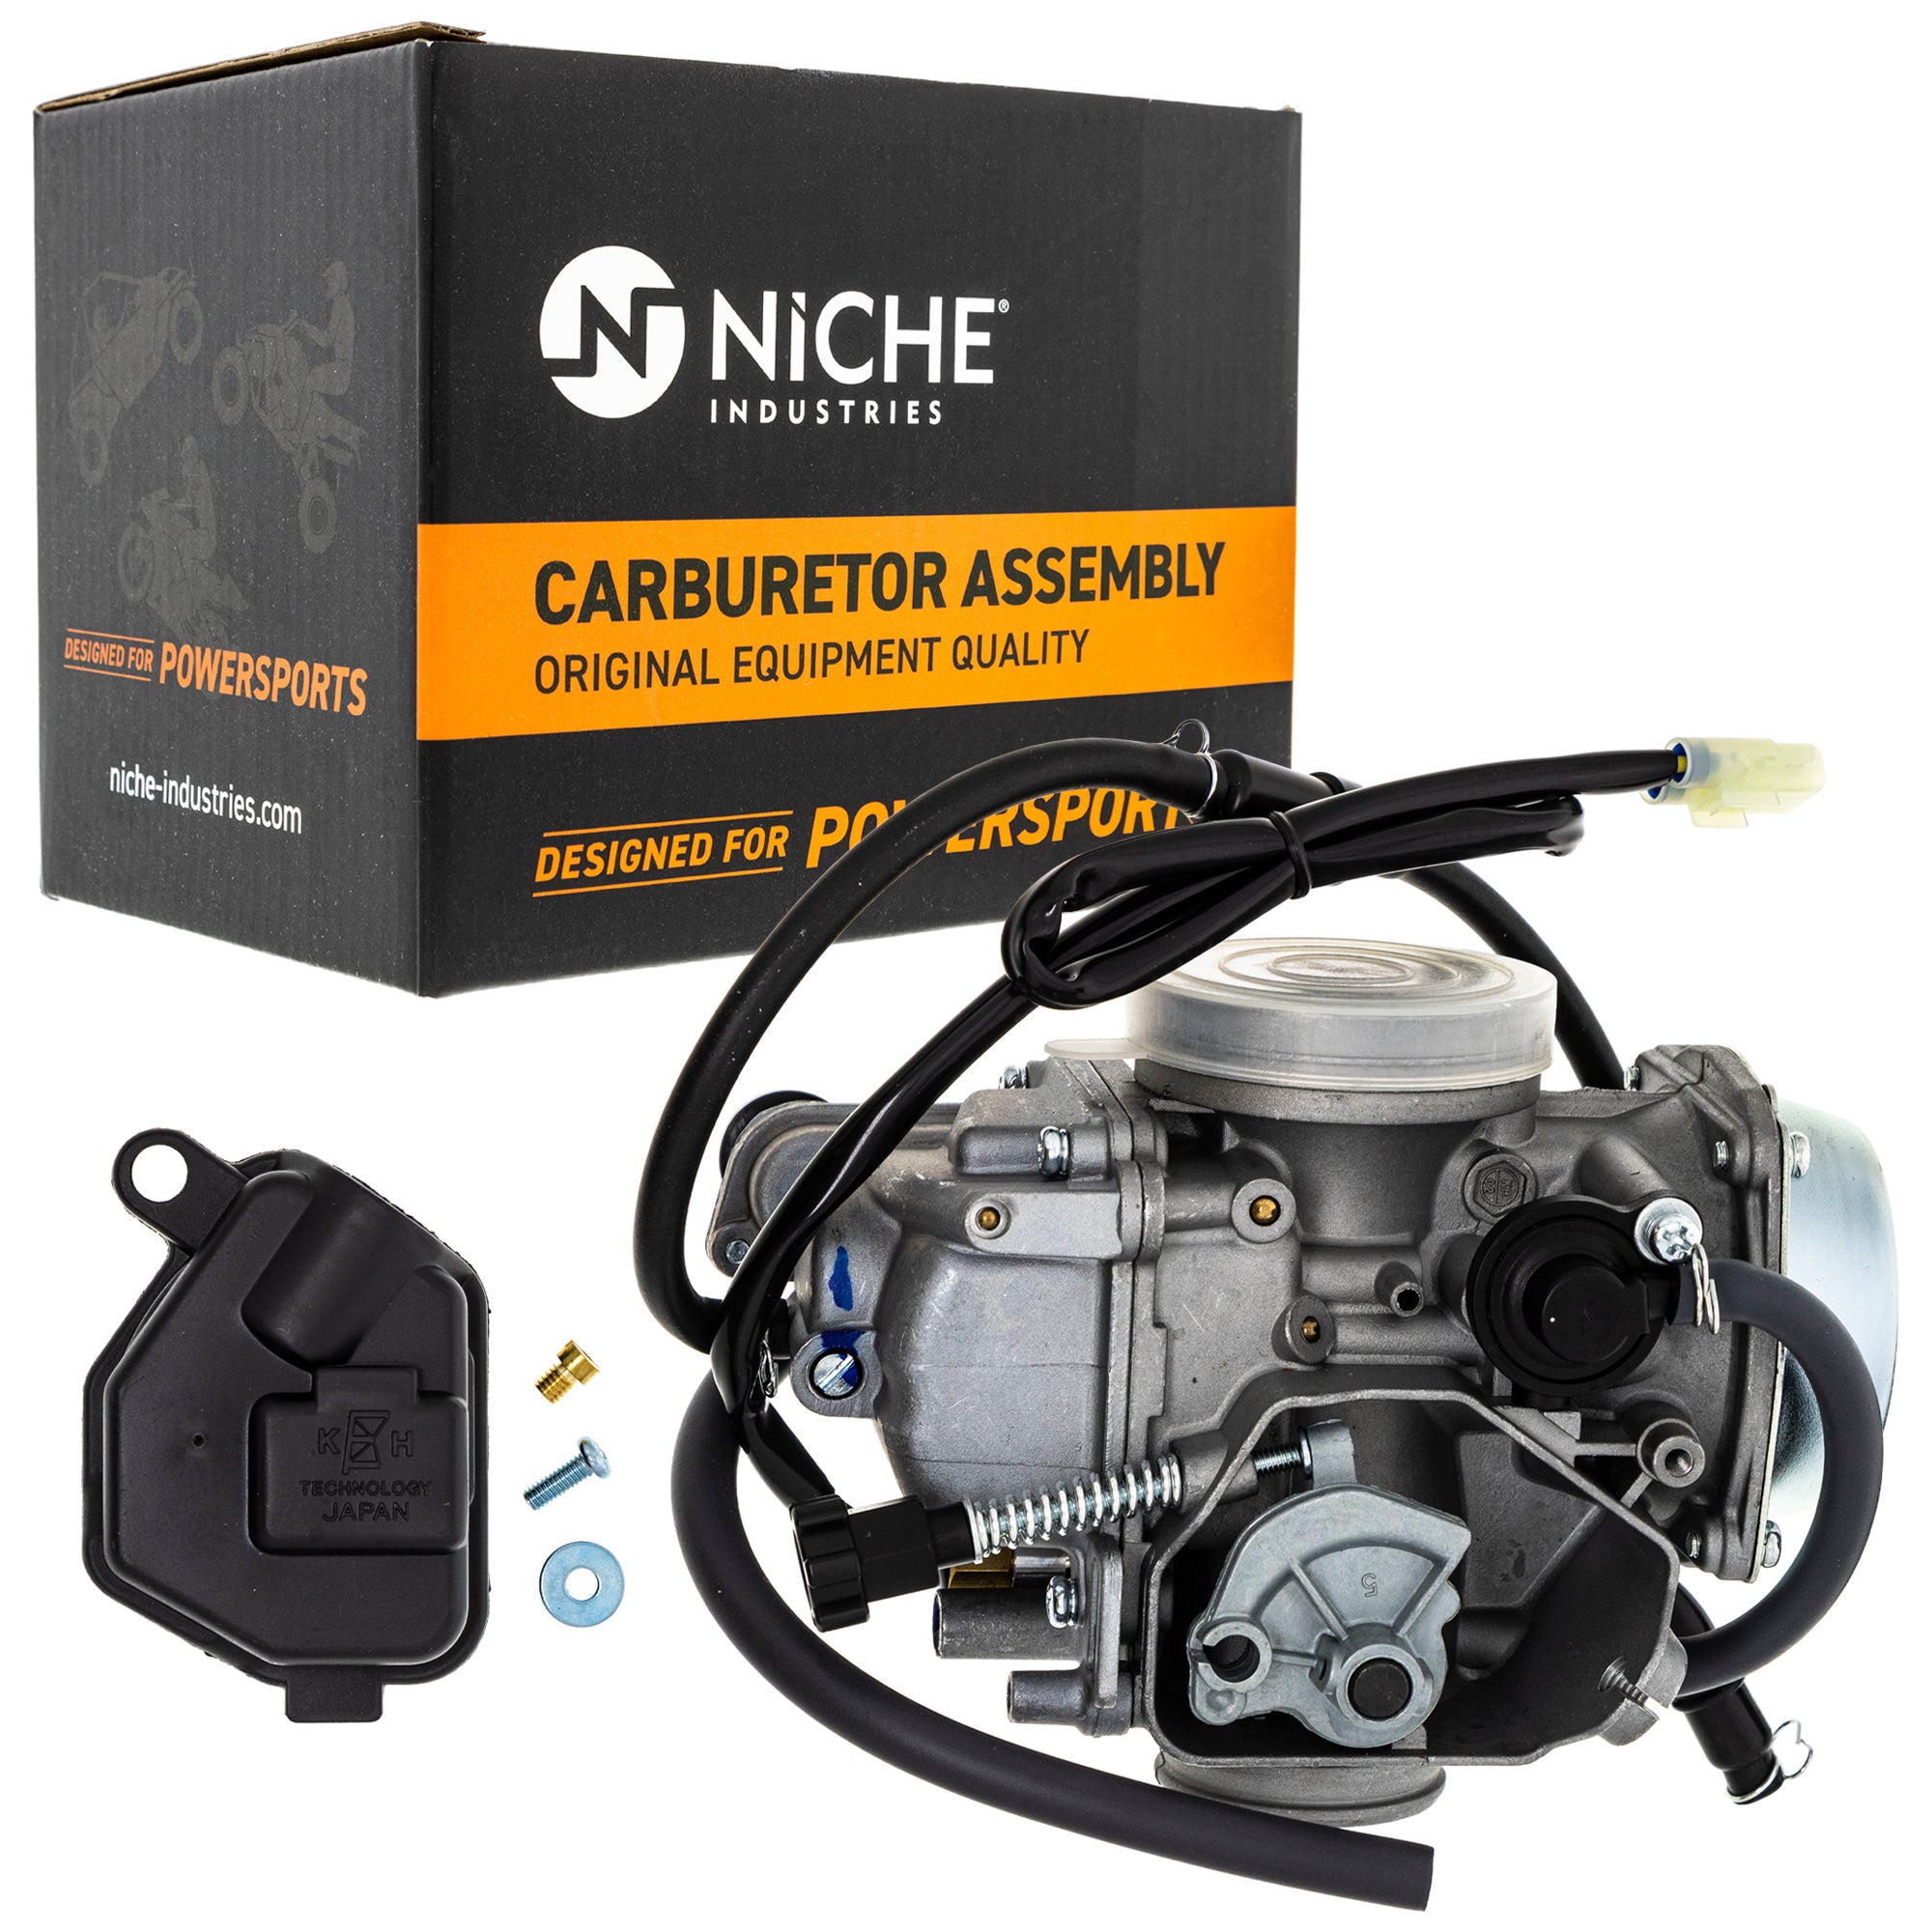 NICHE 519-KCR2234B Carburetor Assembly for zOTHER FourTrax